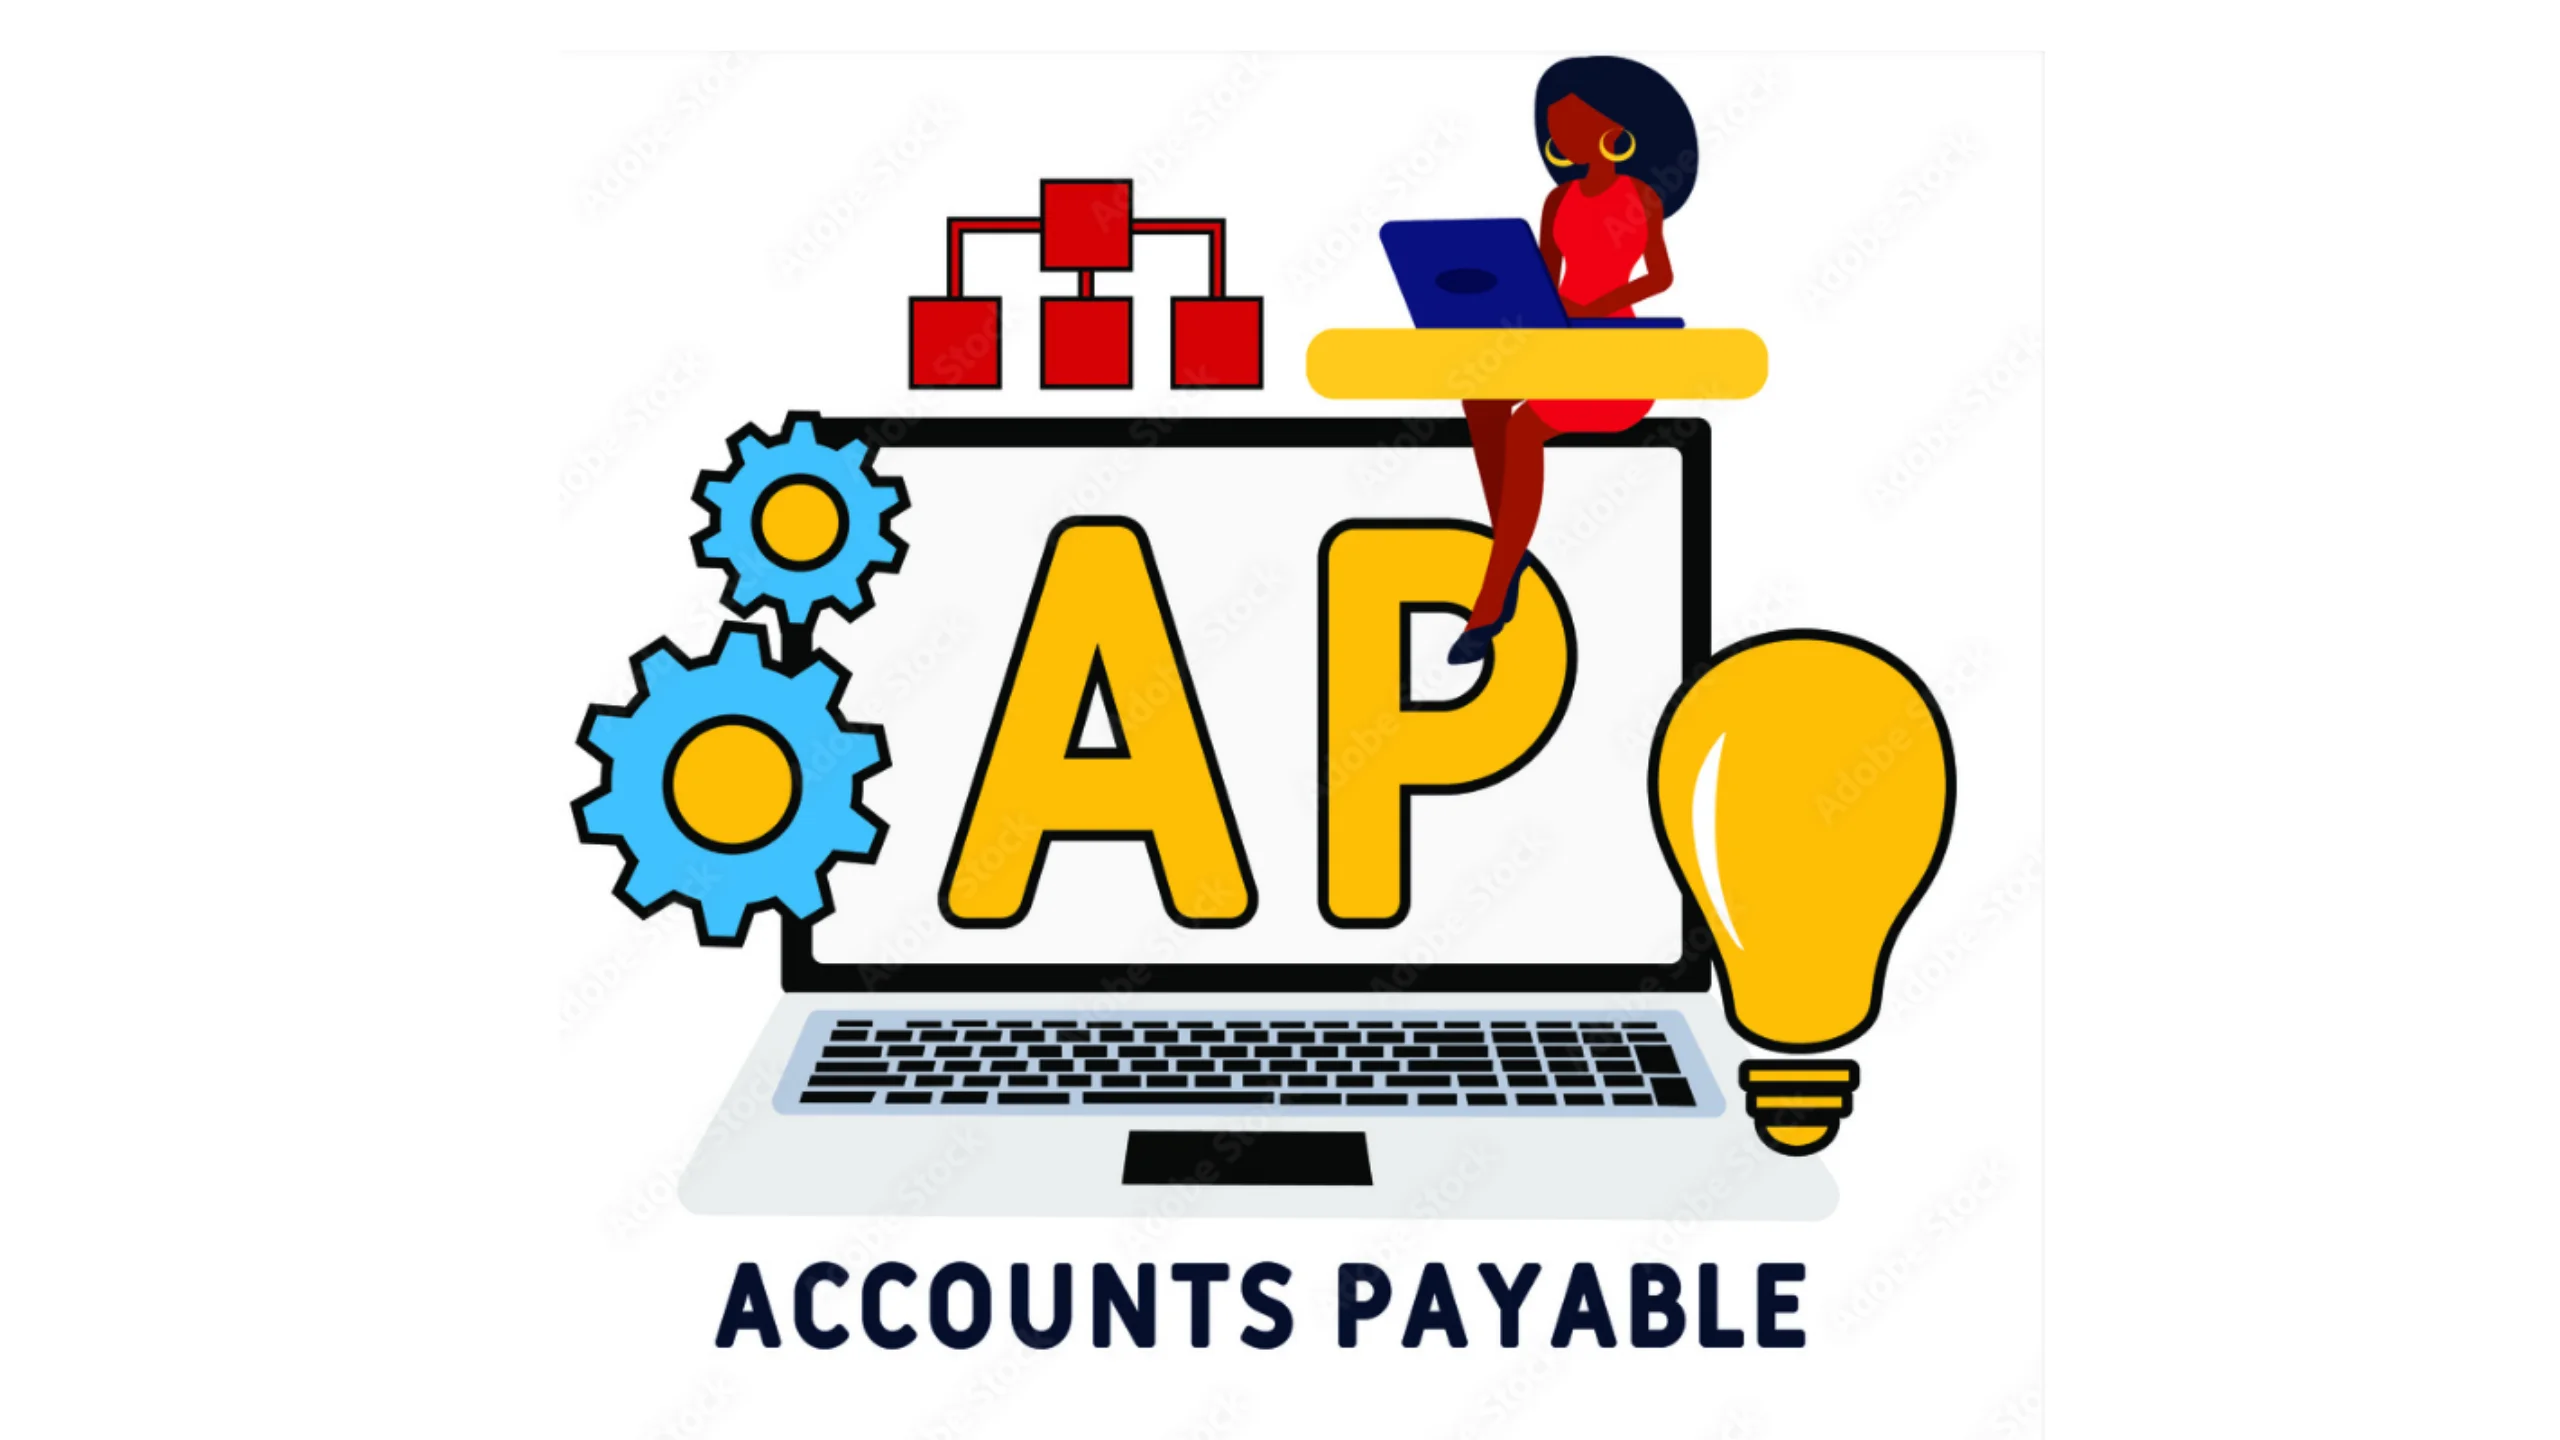 The objectives of an accounts payable process are multifaceted, encompassing financial accuracy, efficient operations